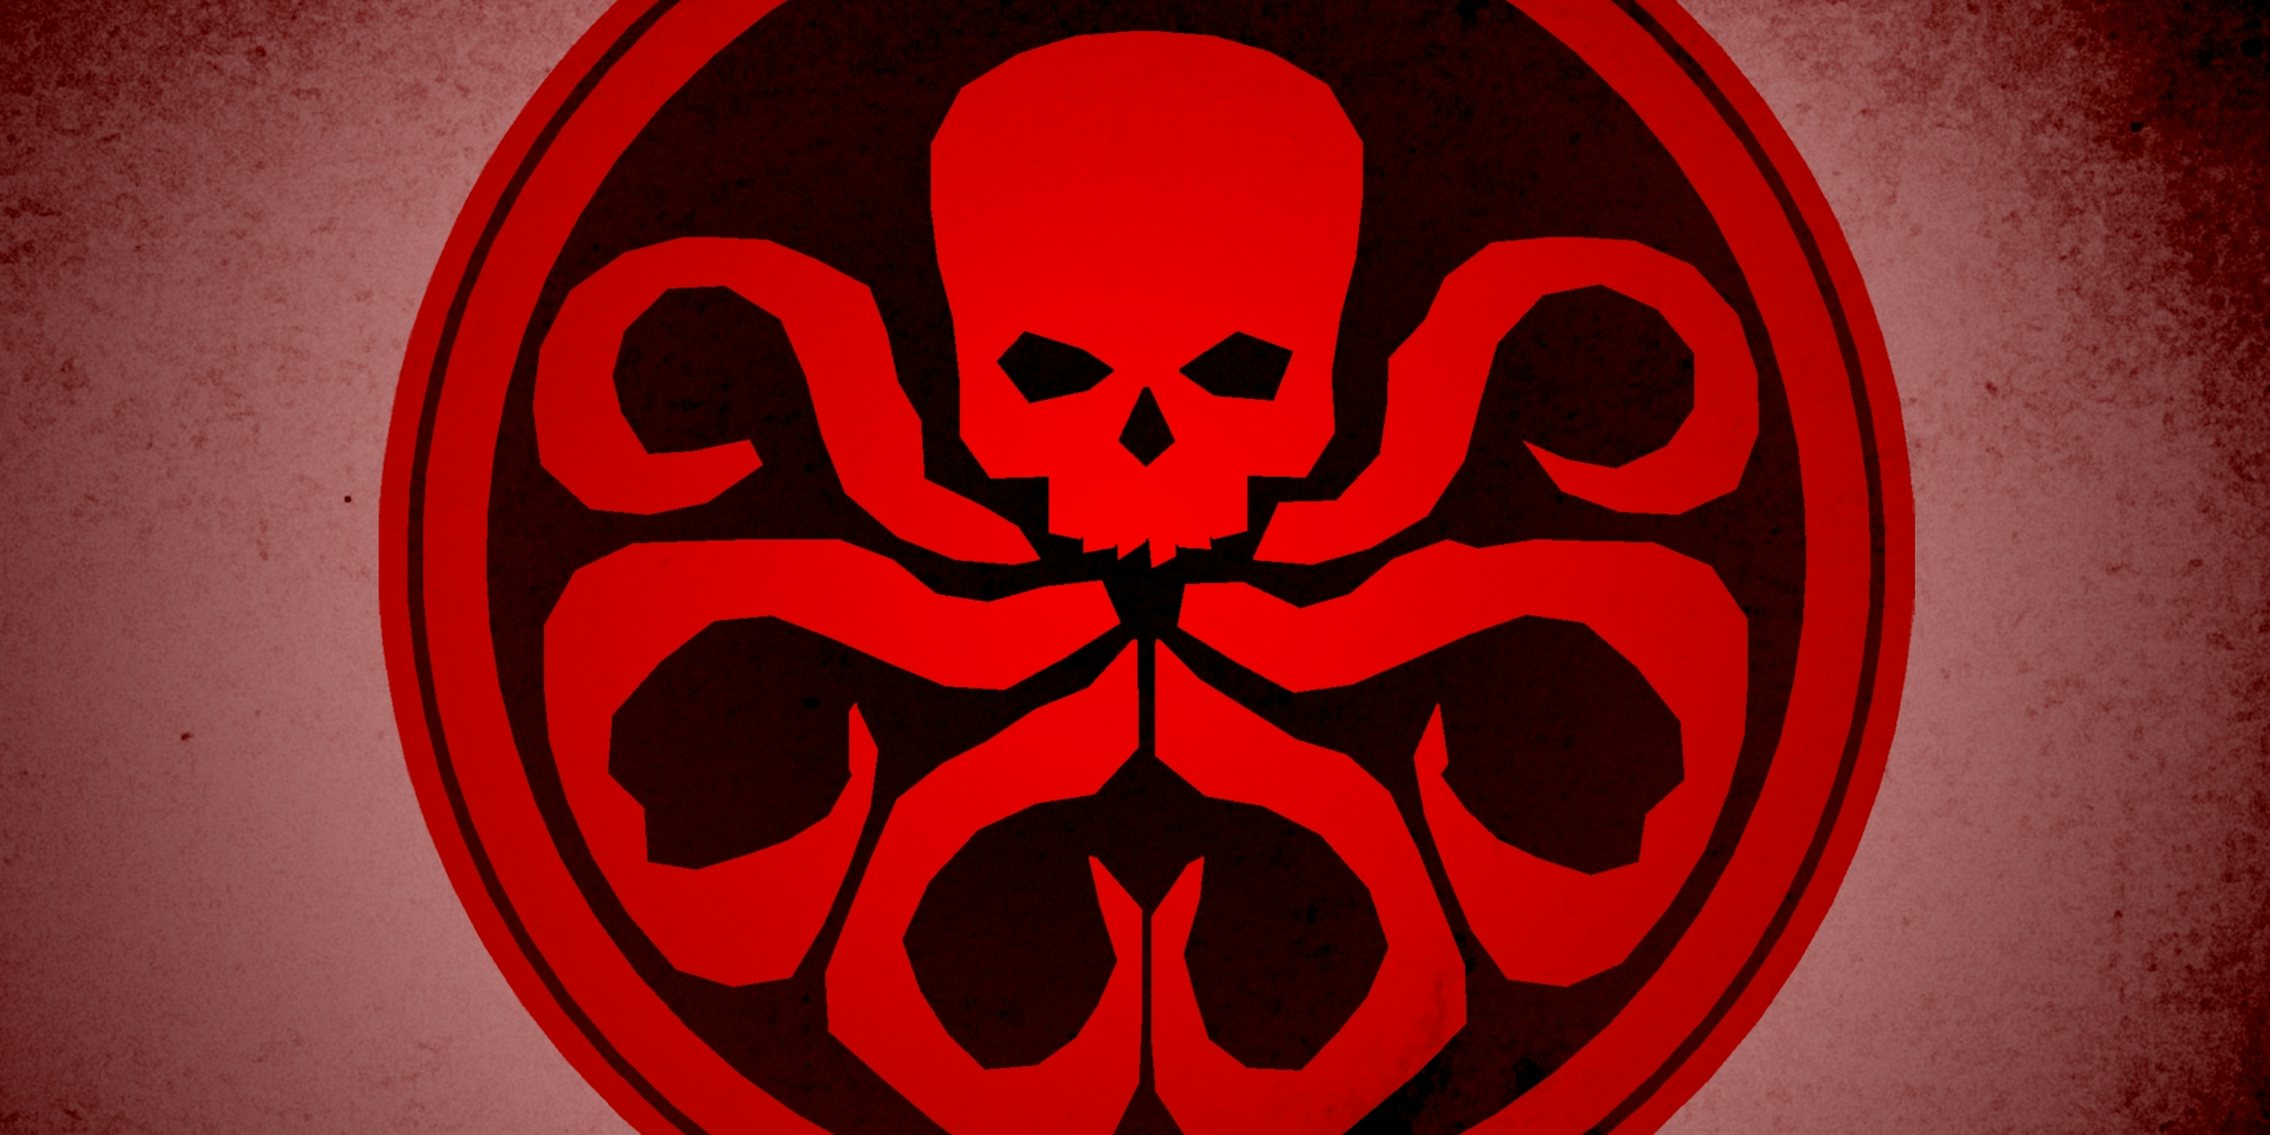 Everything to Know About the 'Hail Hydra' Meme